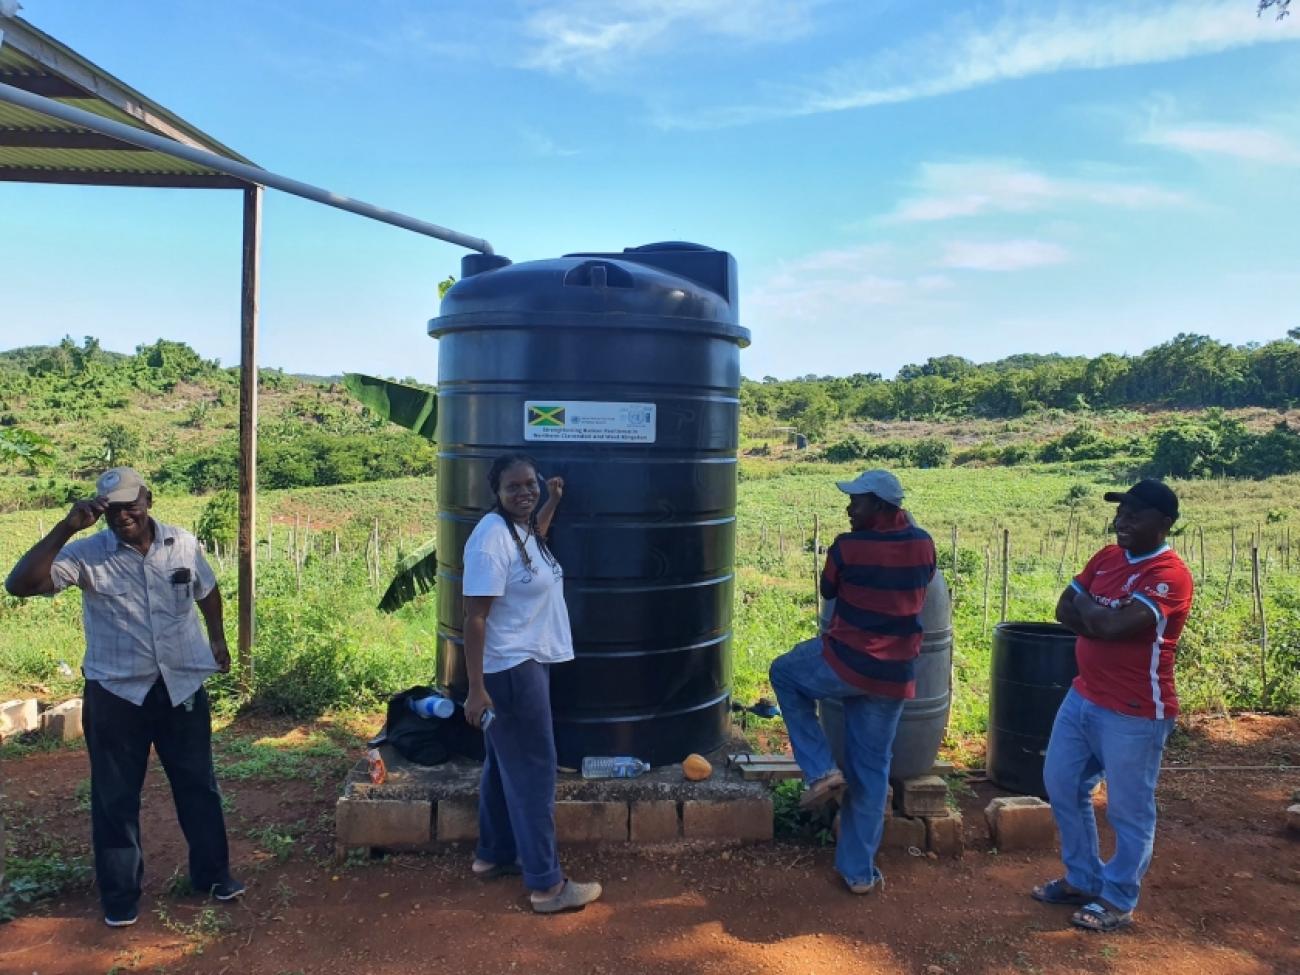 Four members of the Mount Airy Farmers group stand beside one of the black water tanks.